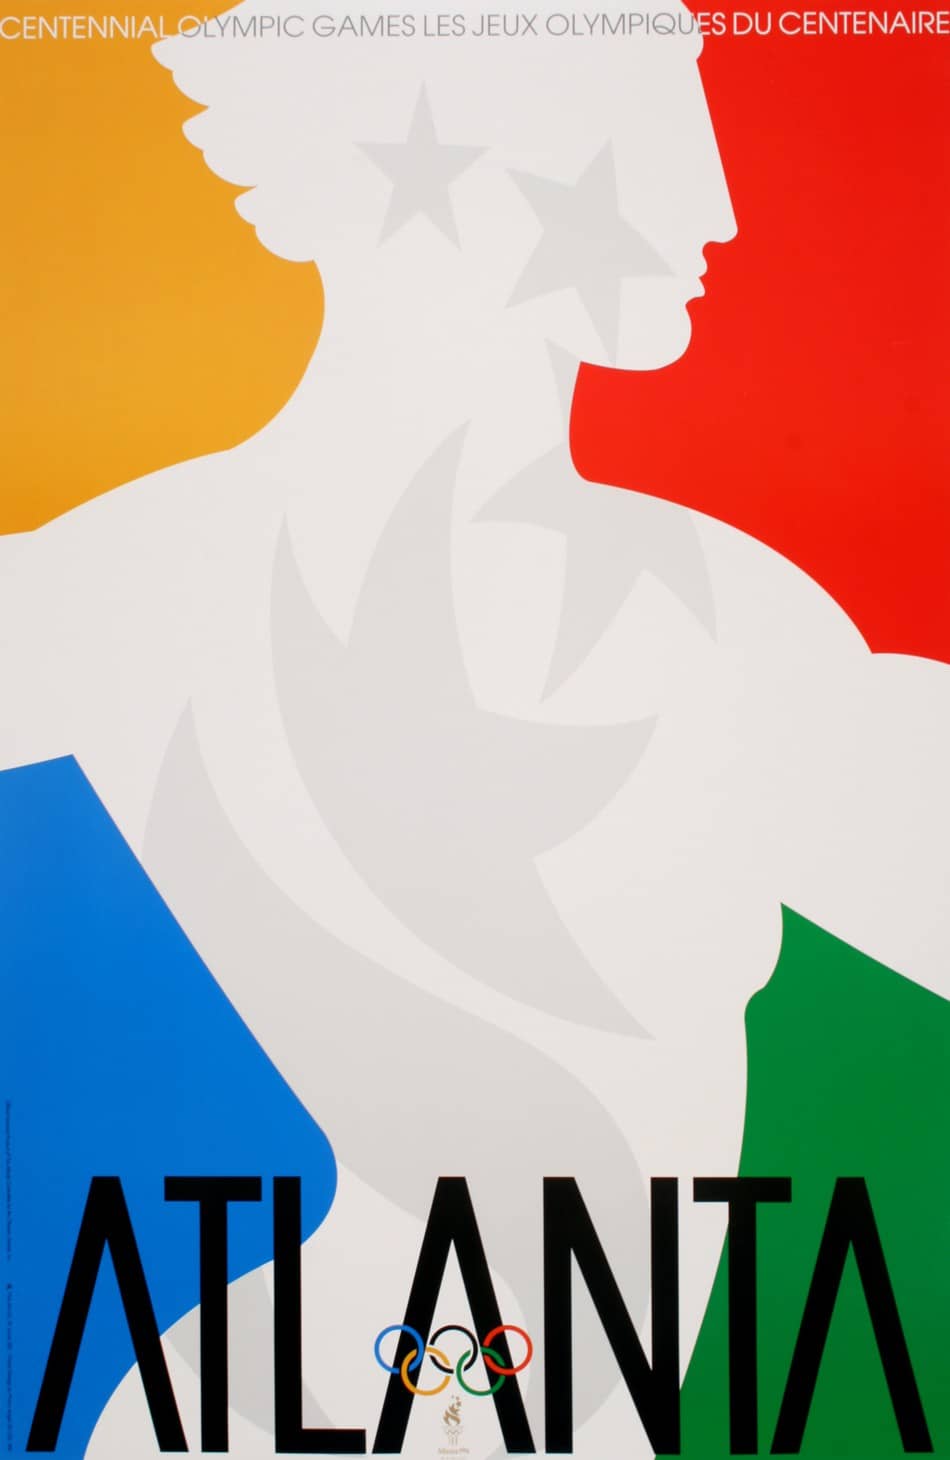 Atlanta Olympics 1996 Poster by Angeli Large Format